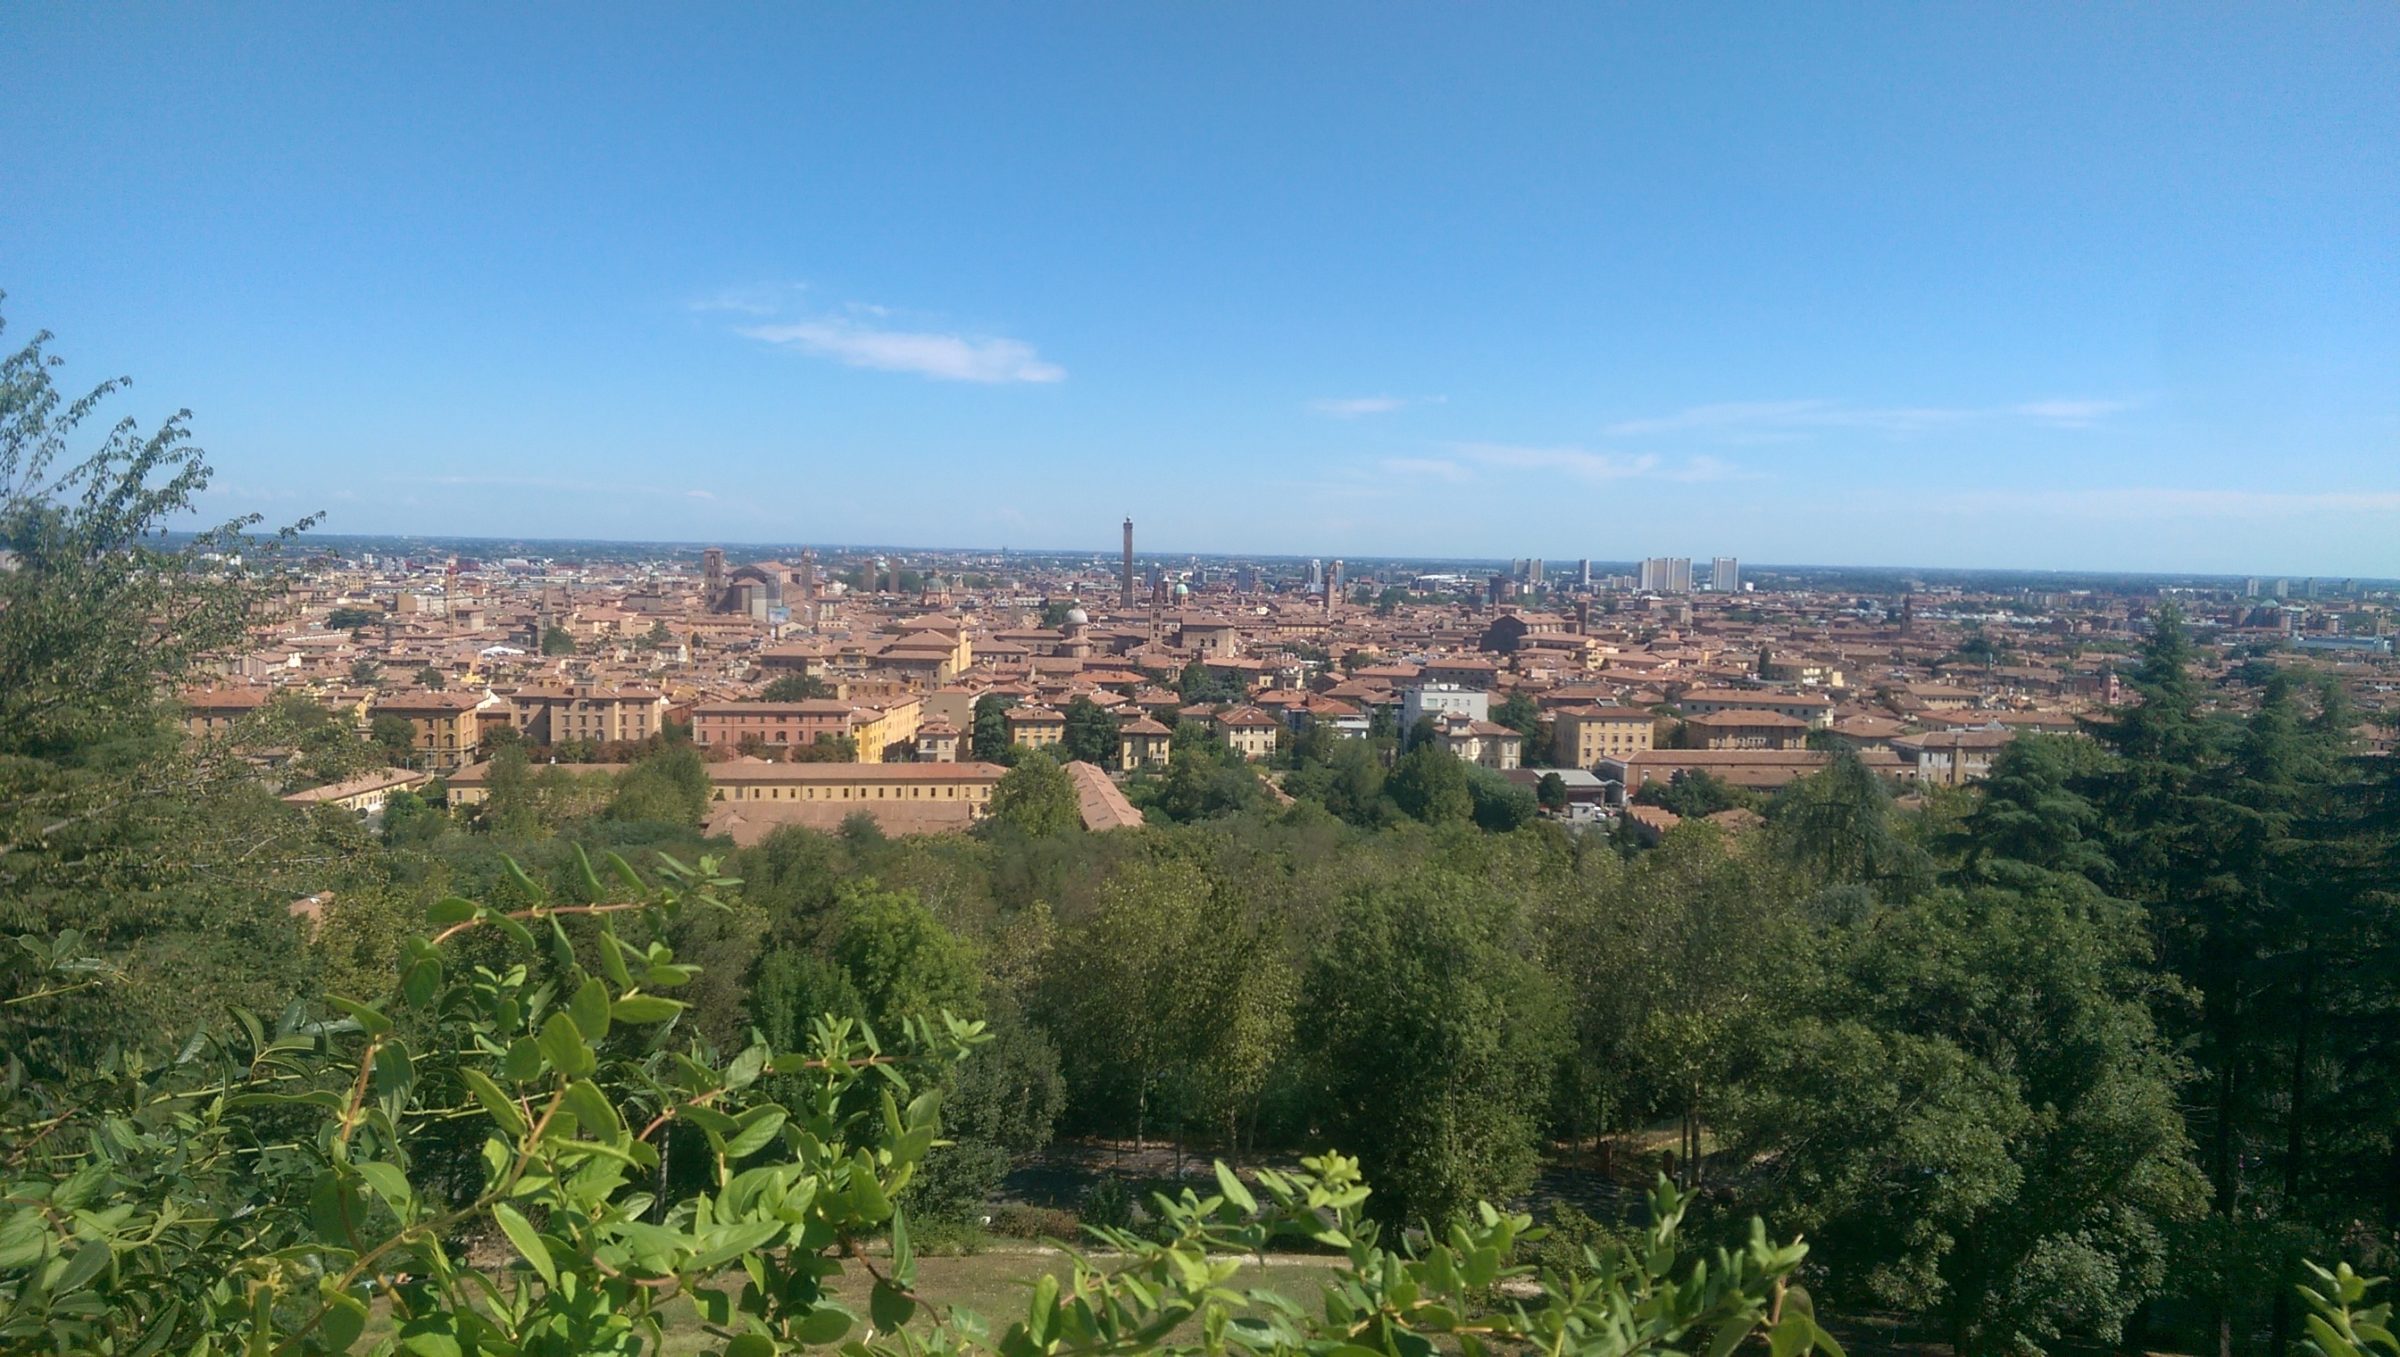 The Rooftops of Bologna